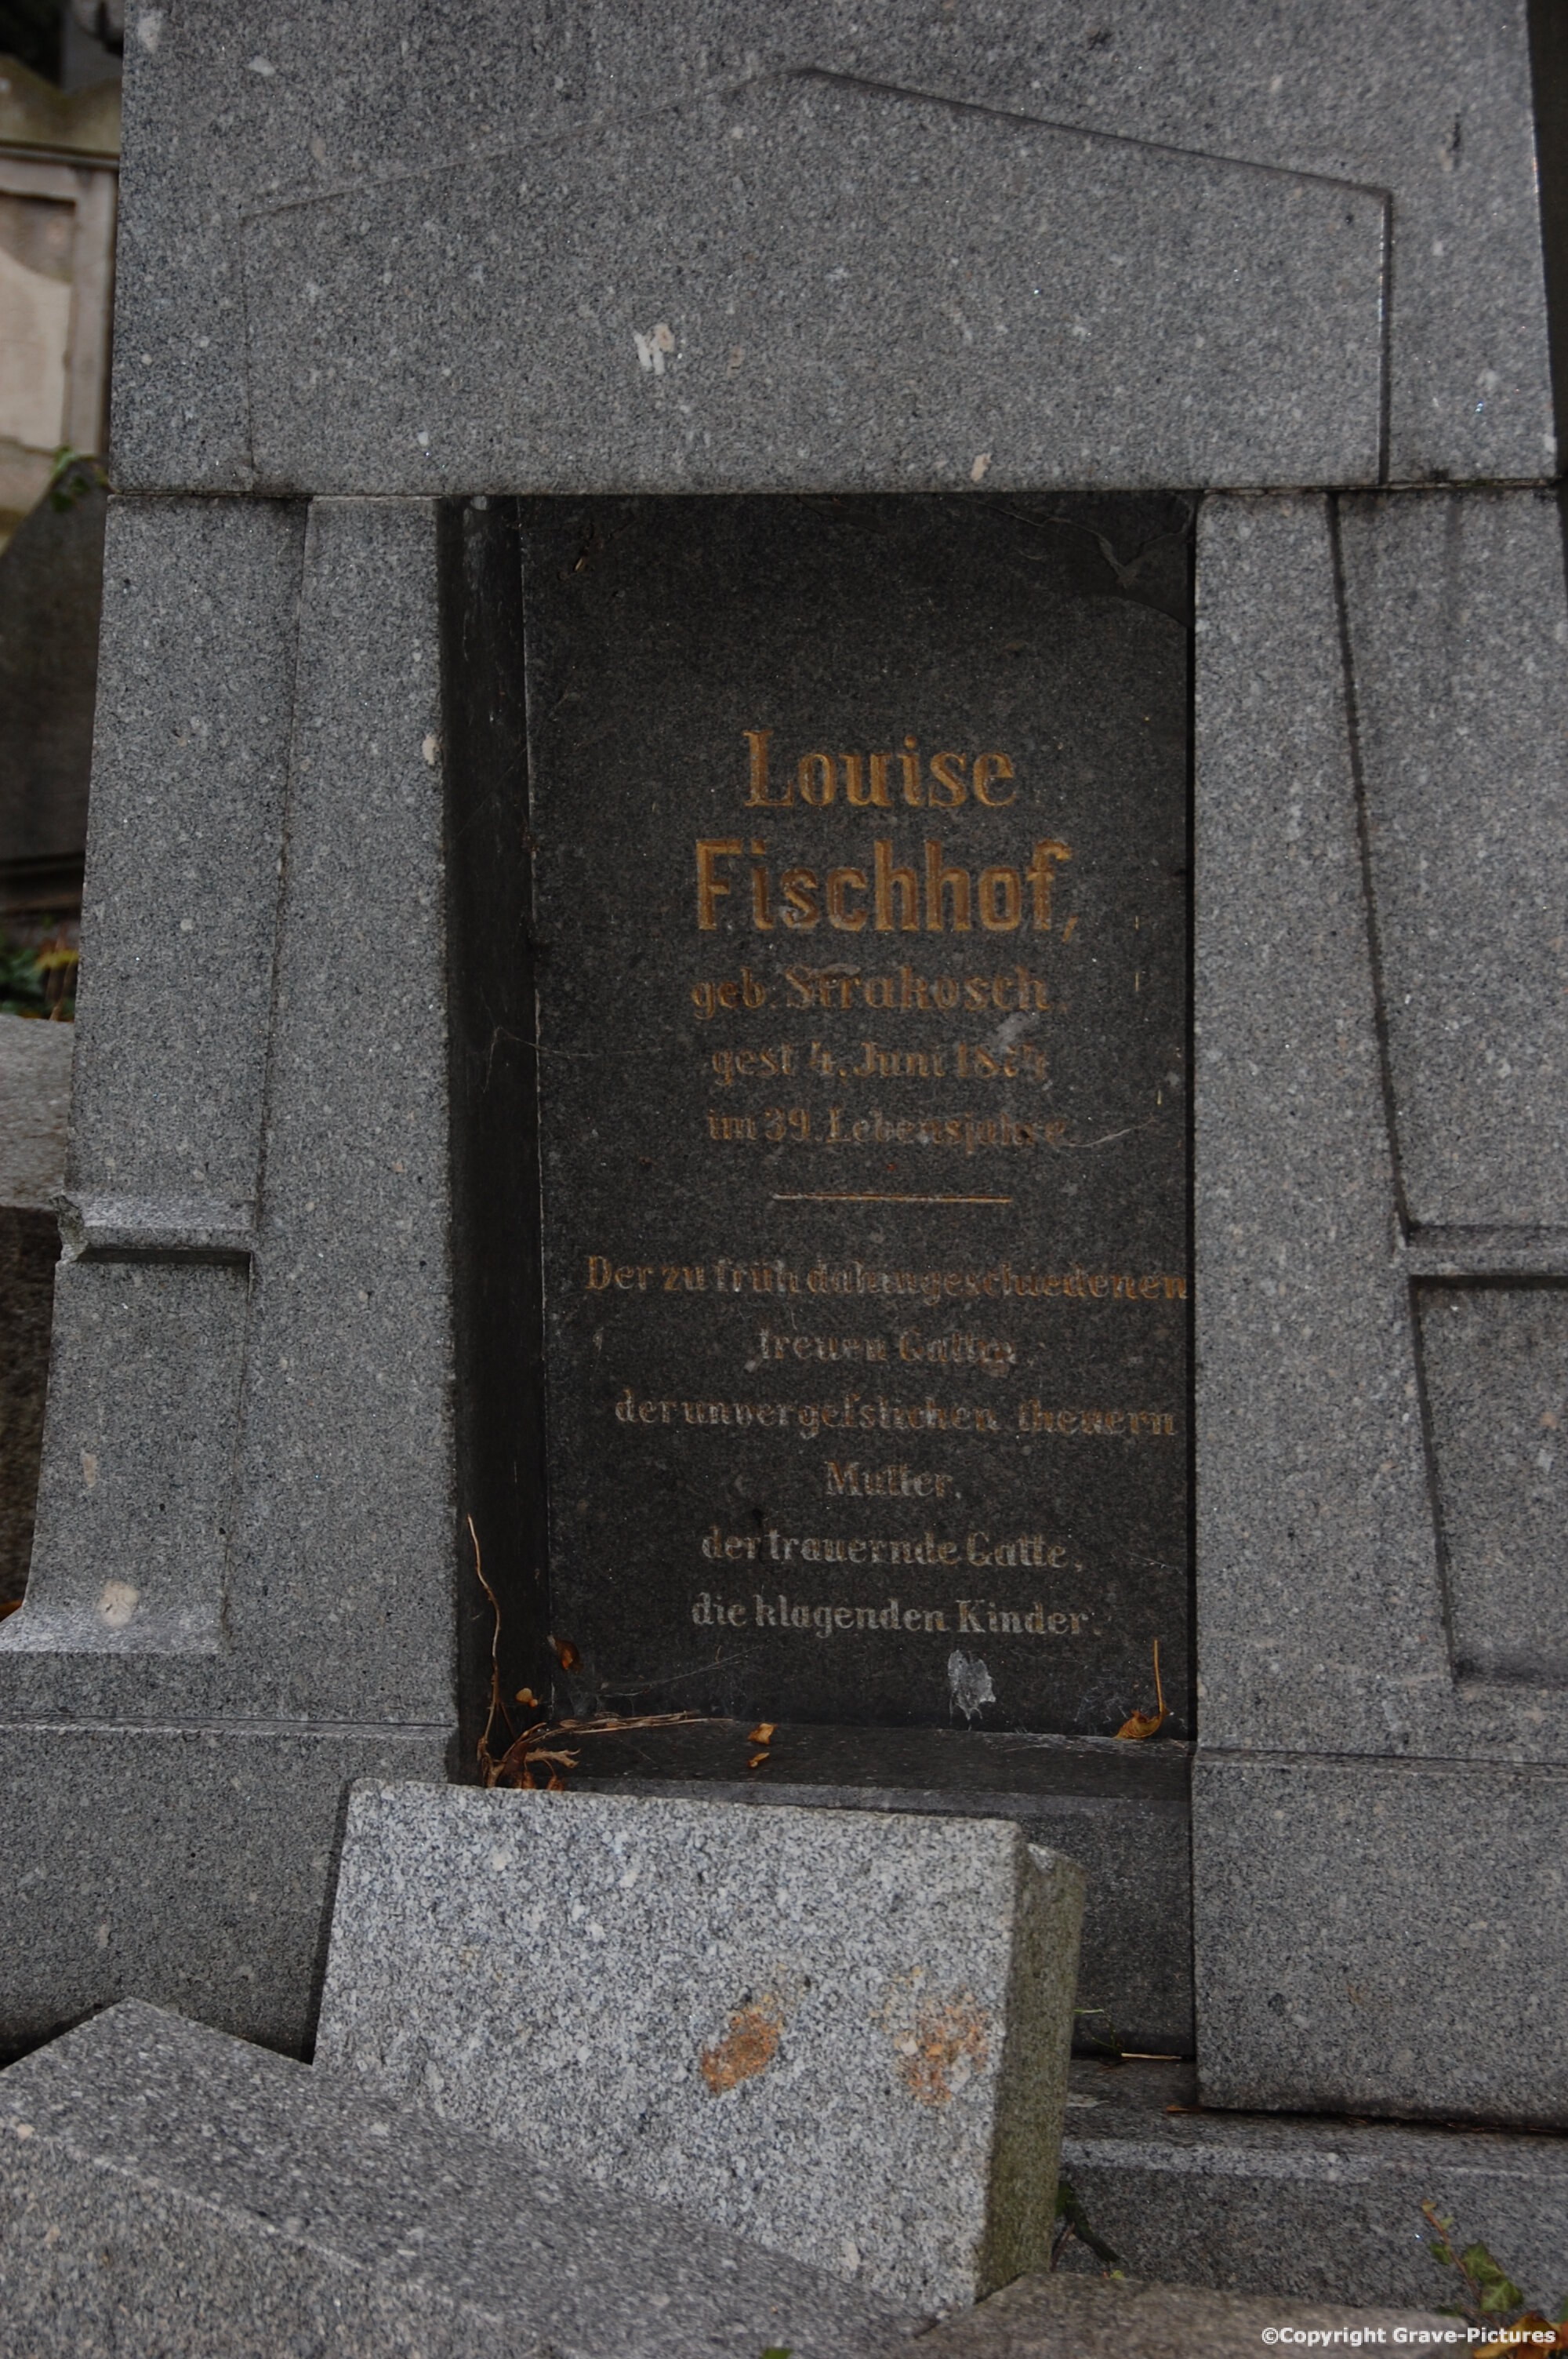 Fischhof Louise